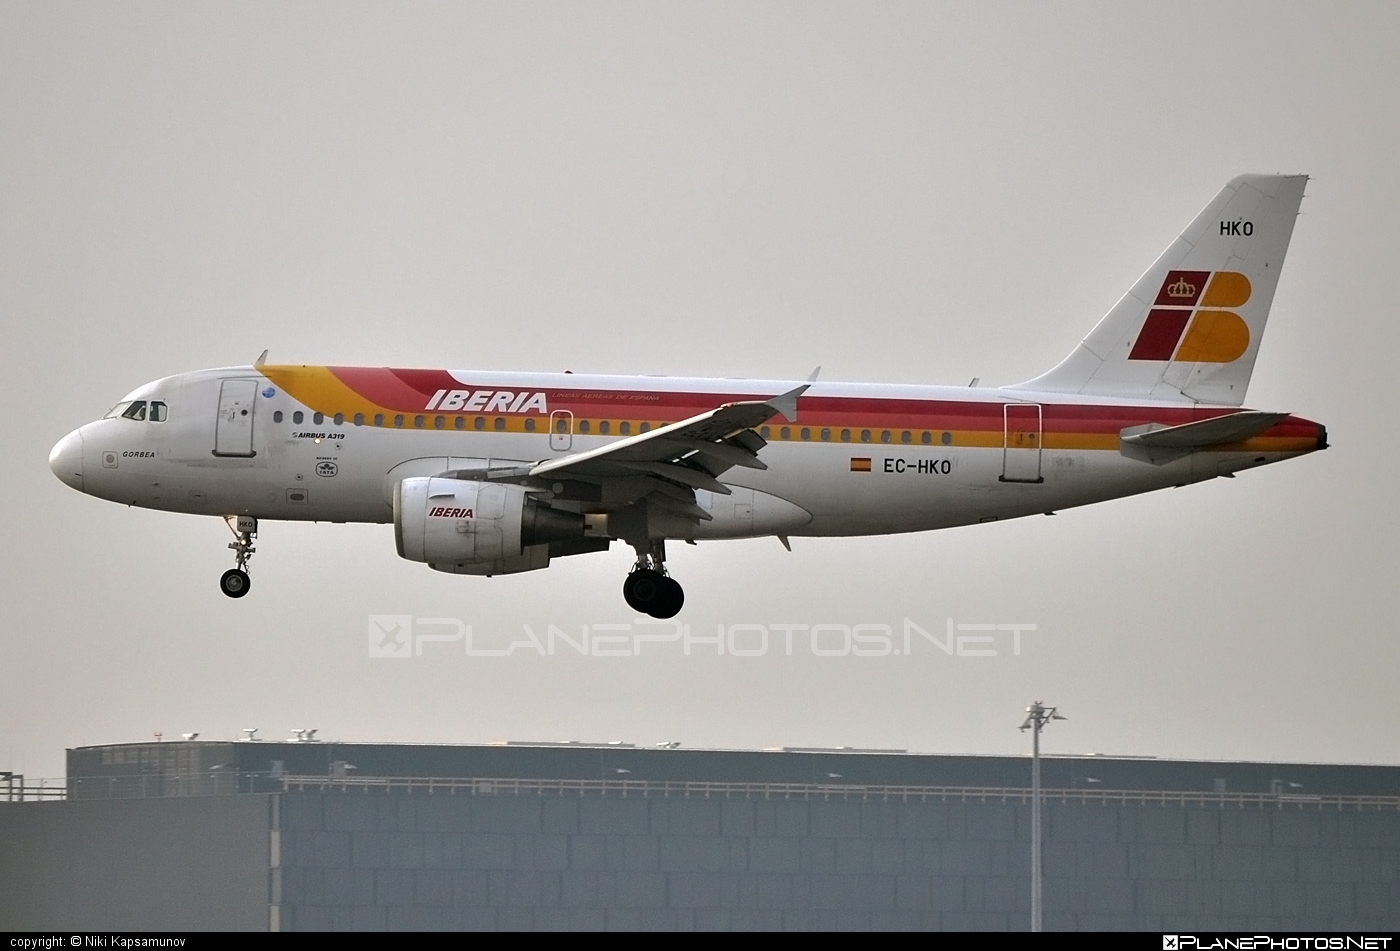 Airbus A319-111 - EC-HKO operated by Iberia #a319 #a320family #airbus #airbus319 #iberia